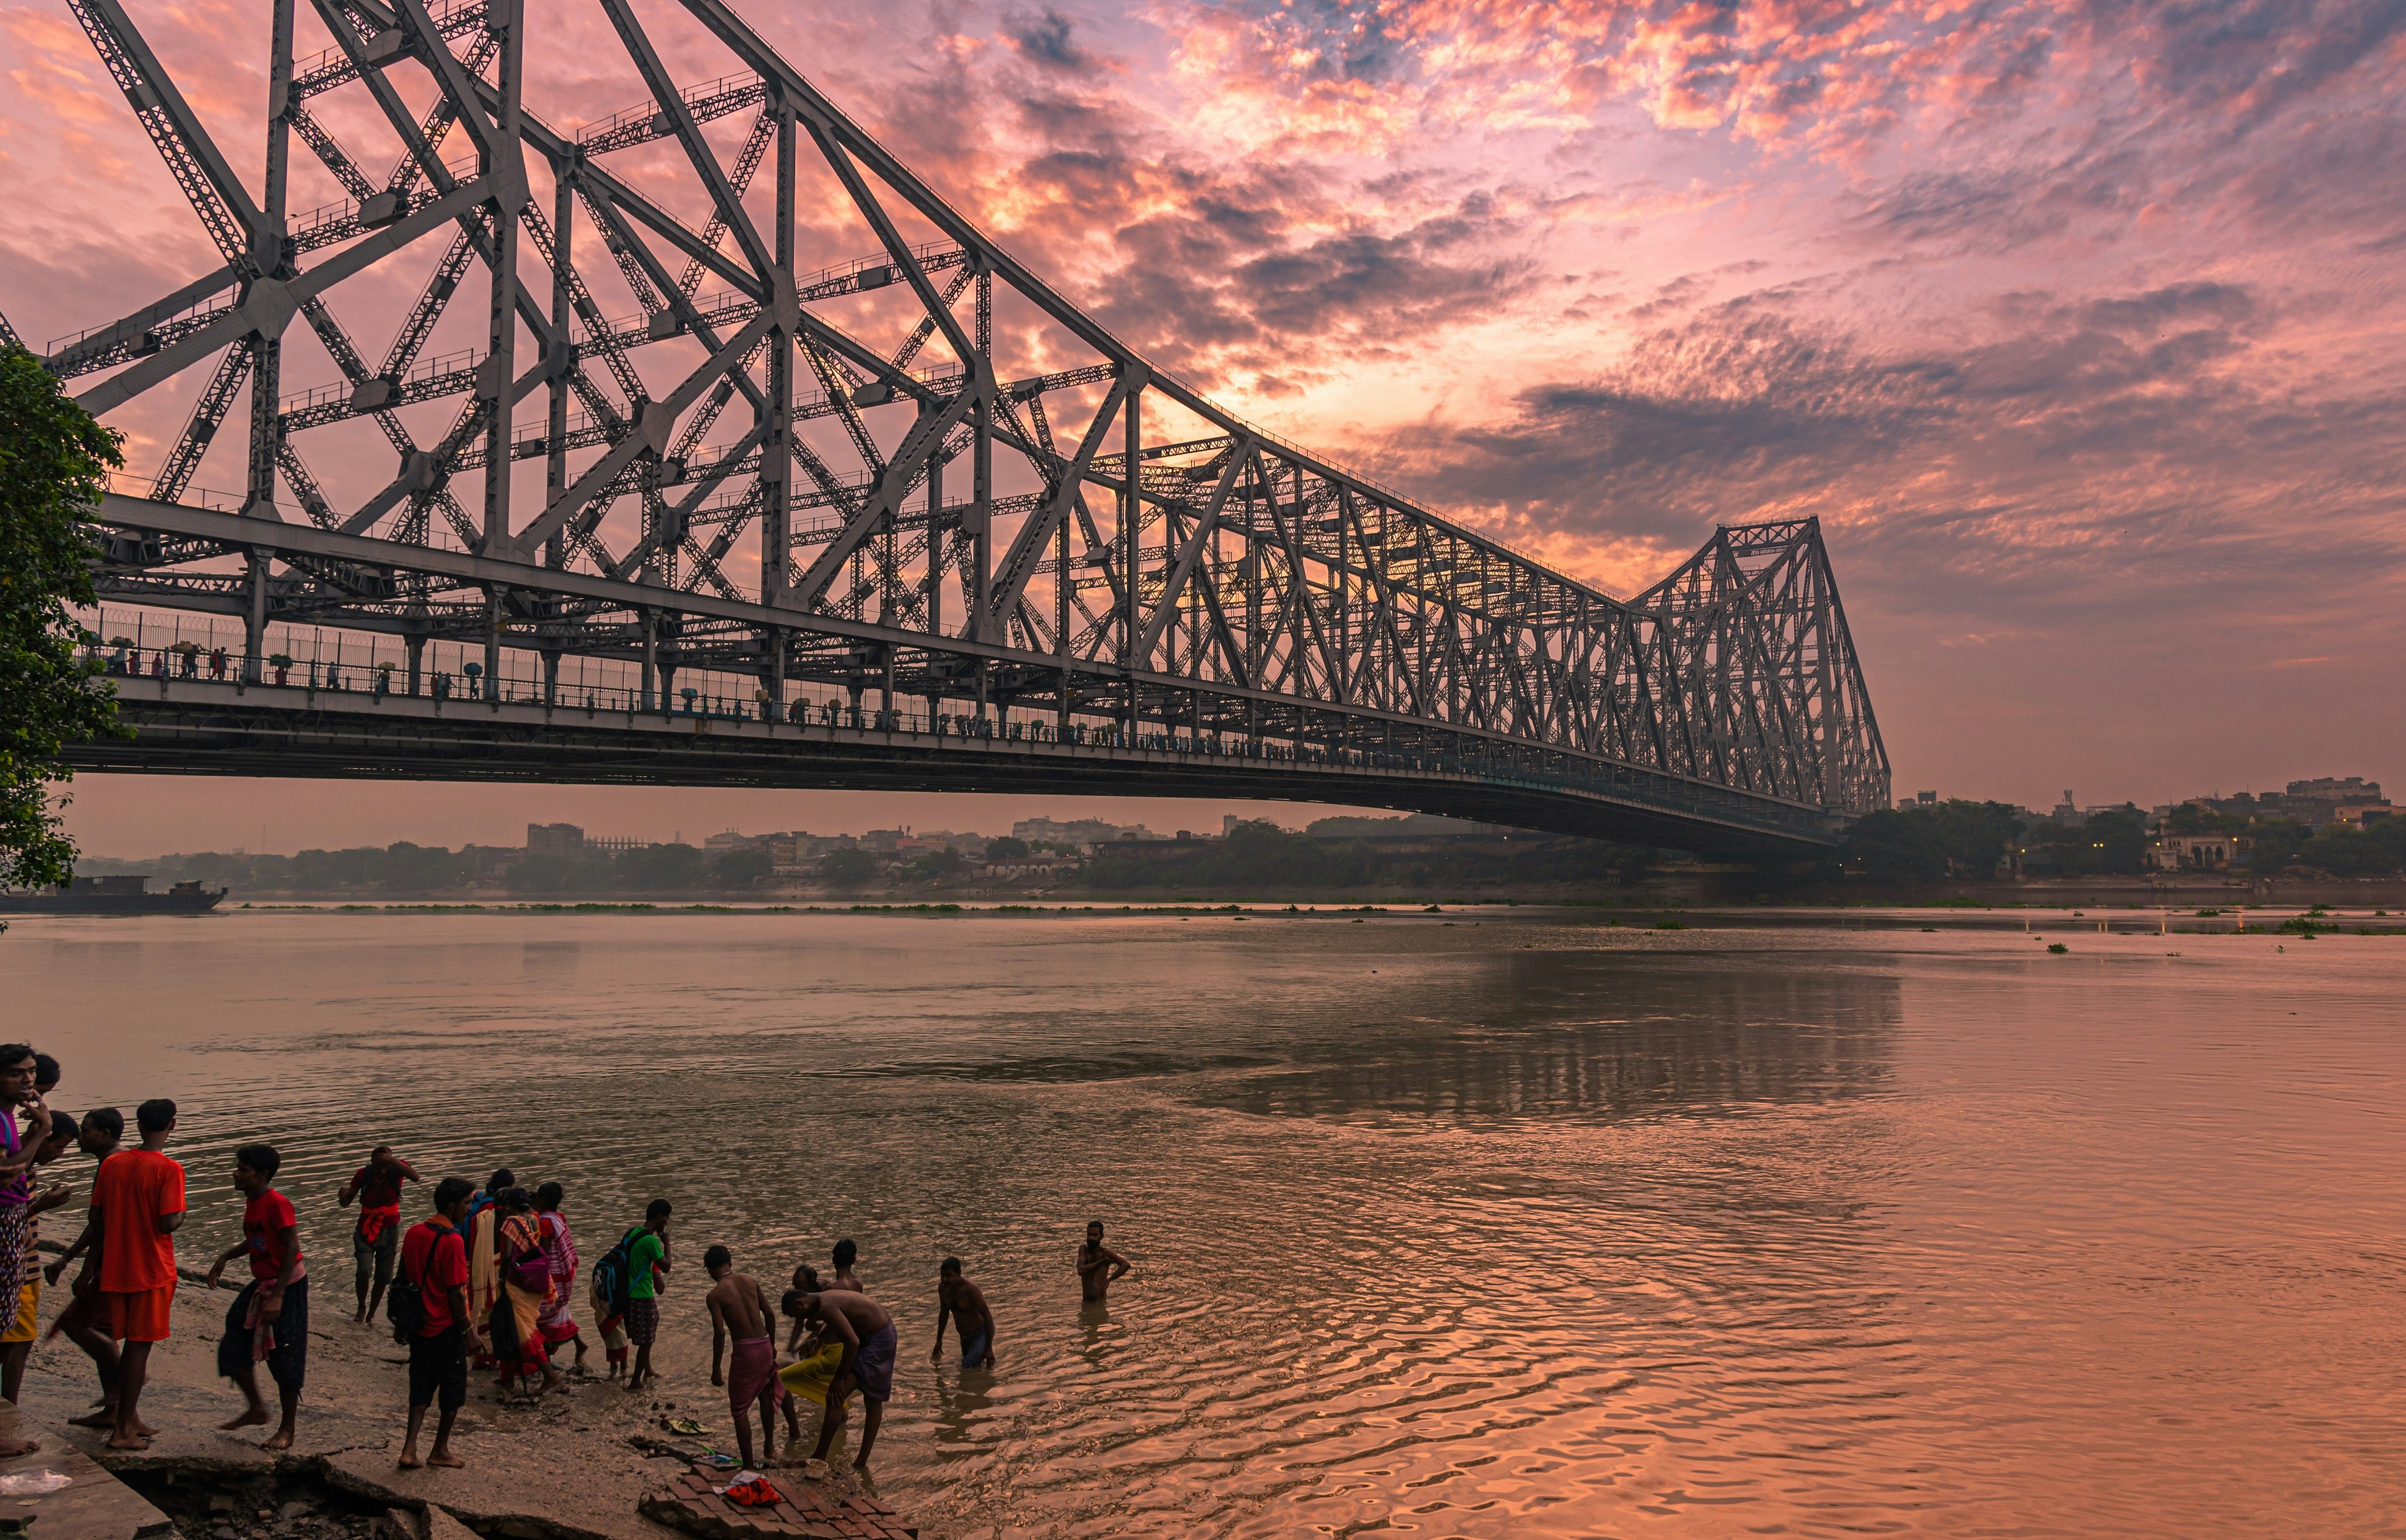 A group of children bathe in the Hooghly River next to one of Kolkata's large bridges in the early evening light.